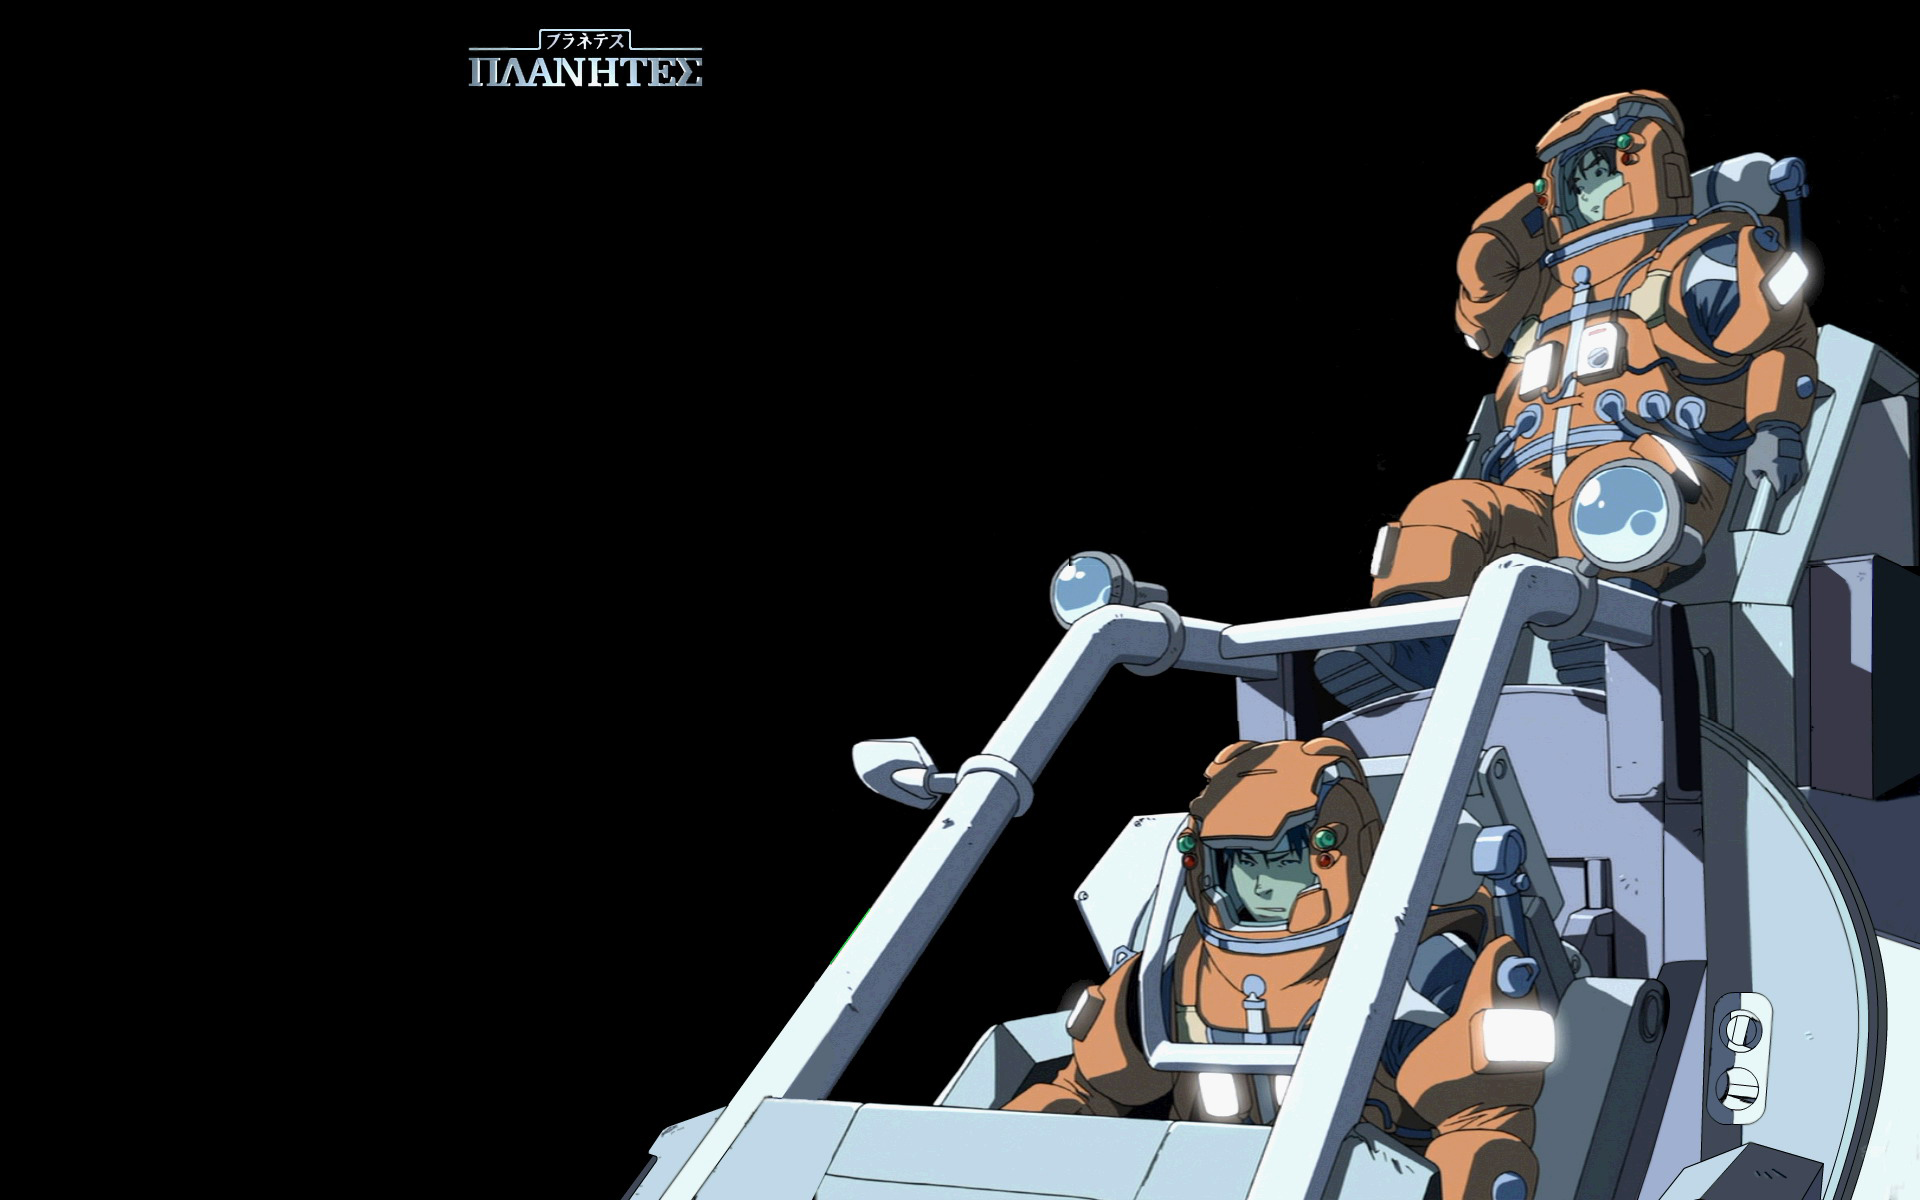 Planetes Hd Wallpaper Background Image 19x10